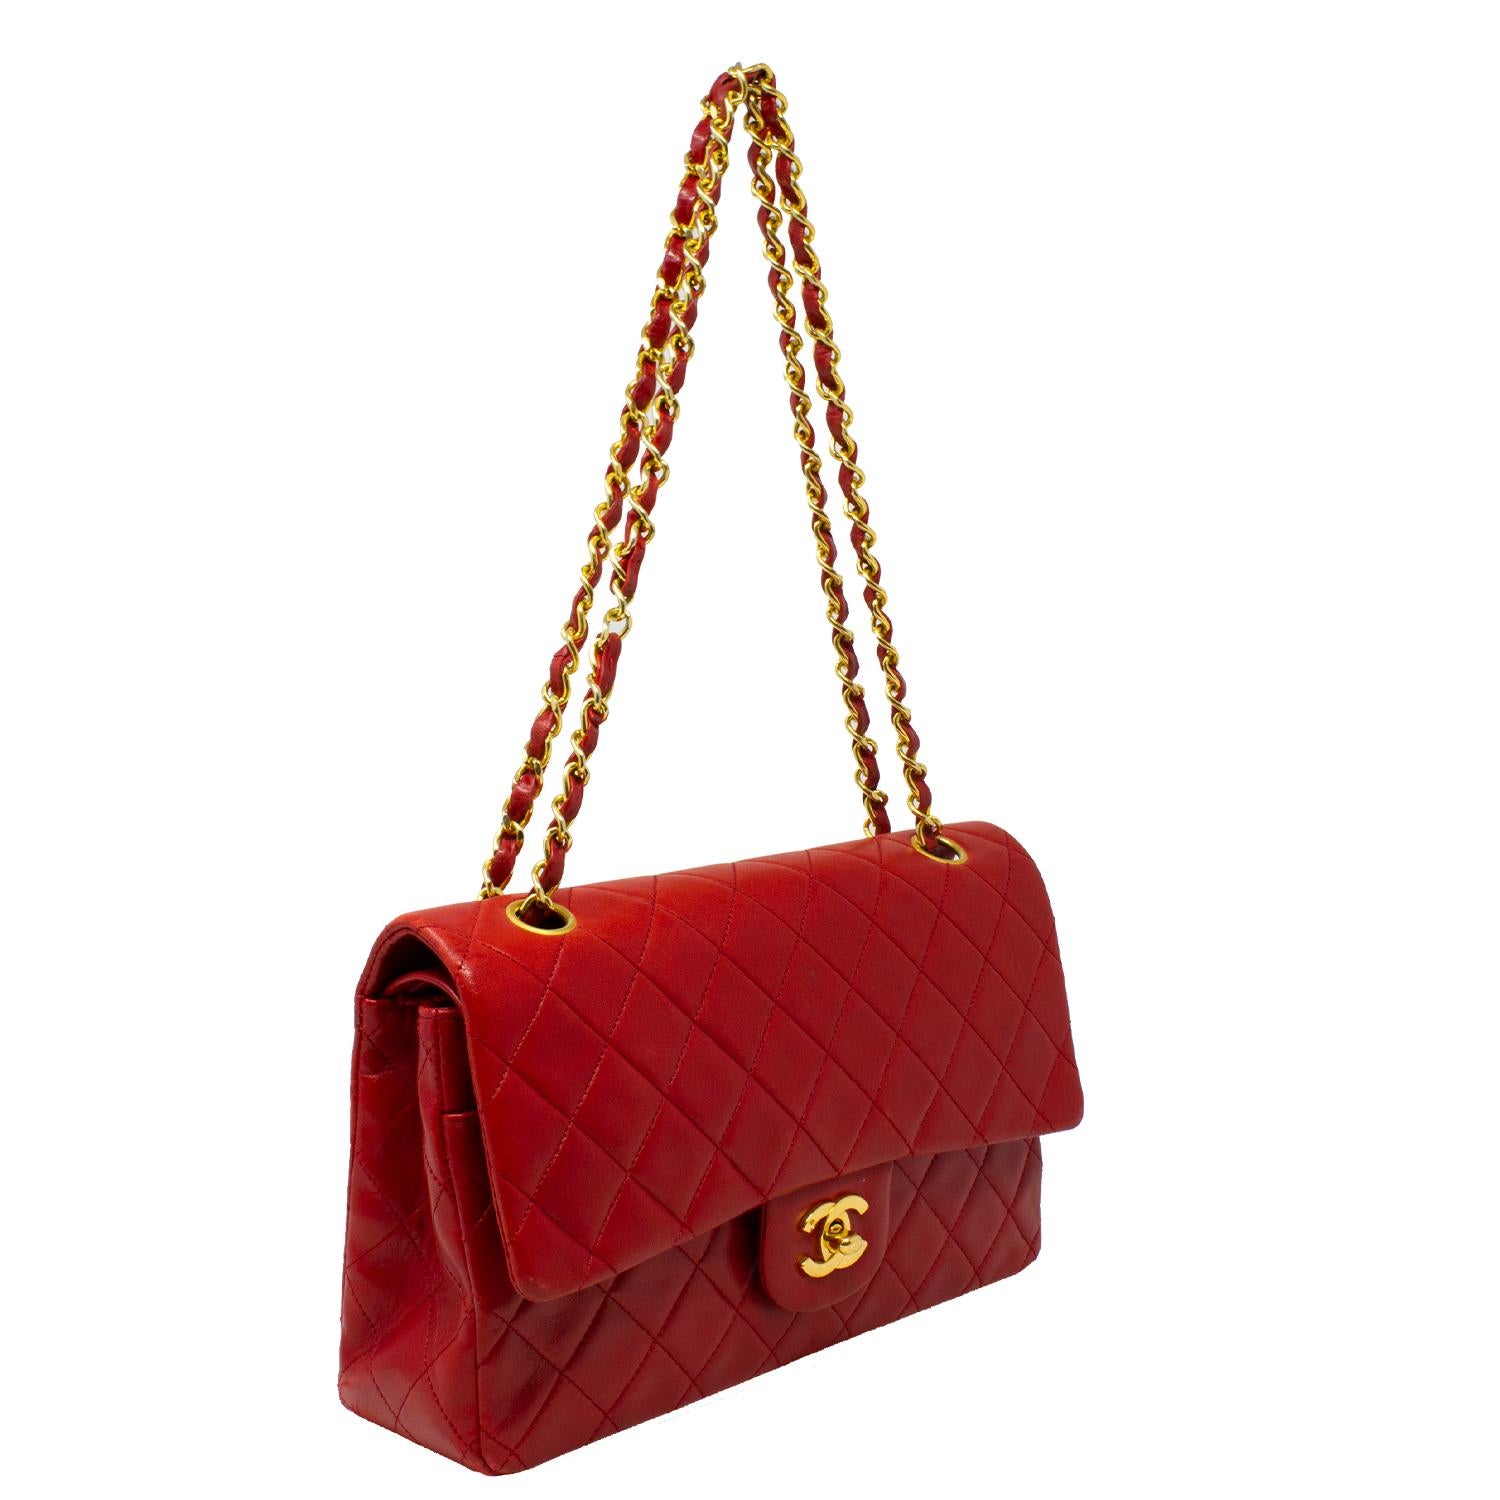 If you are going to get a classic Chanel for your collection, THIS is the one to get as it’s the original double flap bag from the early 90s (Karl Lagerfeld's genius!) with the 24k gold hardware and the red color is so rich and stunning! This red